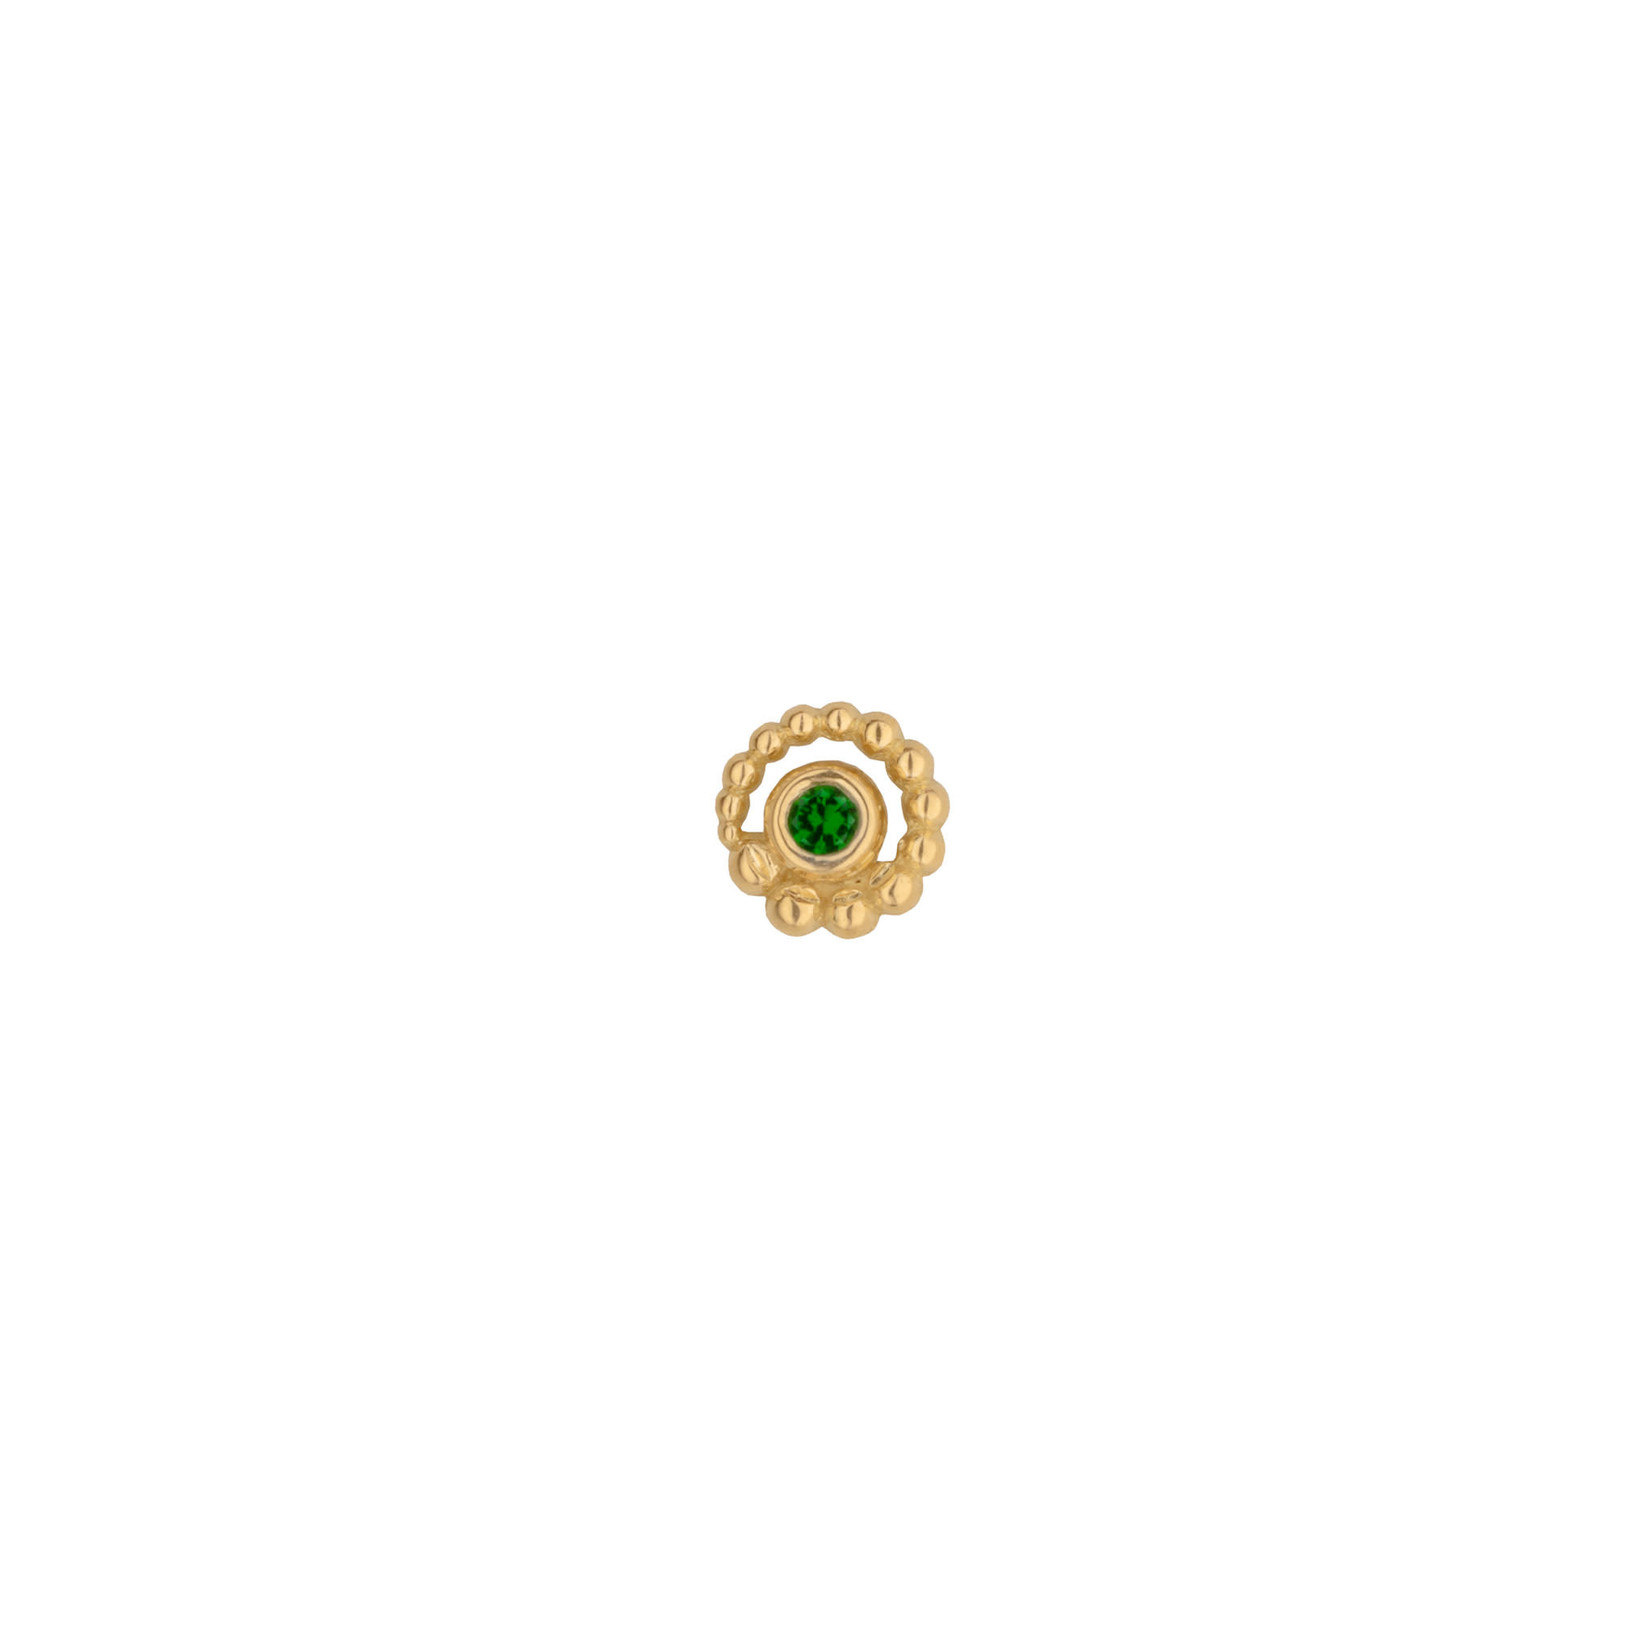 BVLA BVLA yellow gold "Beaded Bezel Swirl" press-fit end with 2.0 AA green tourmaline, graduating to the right